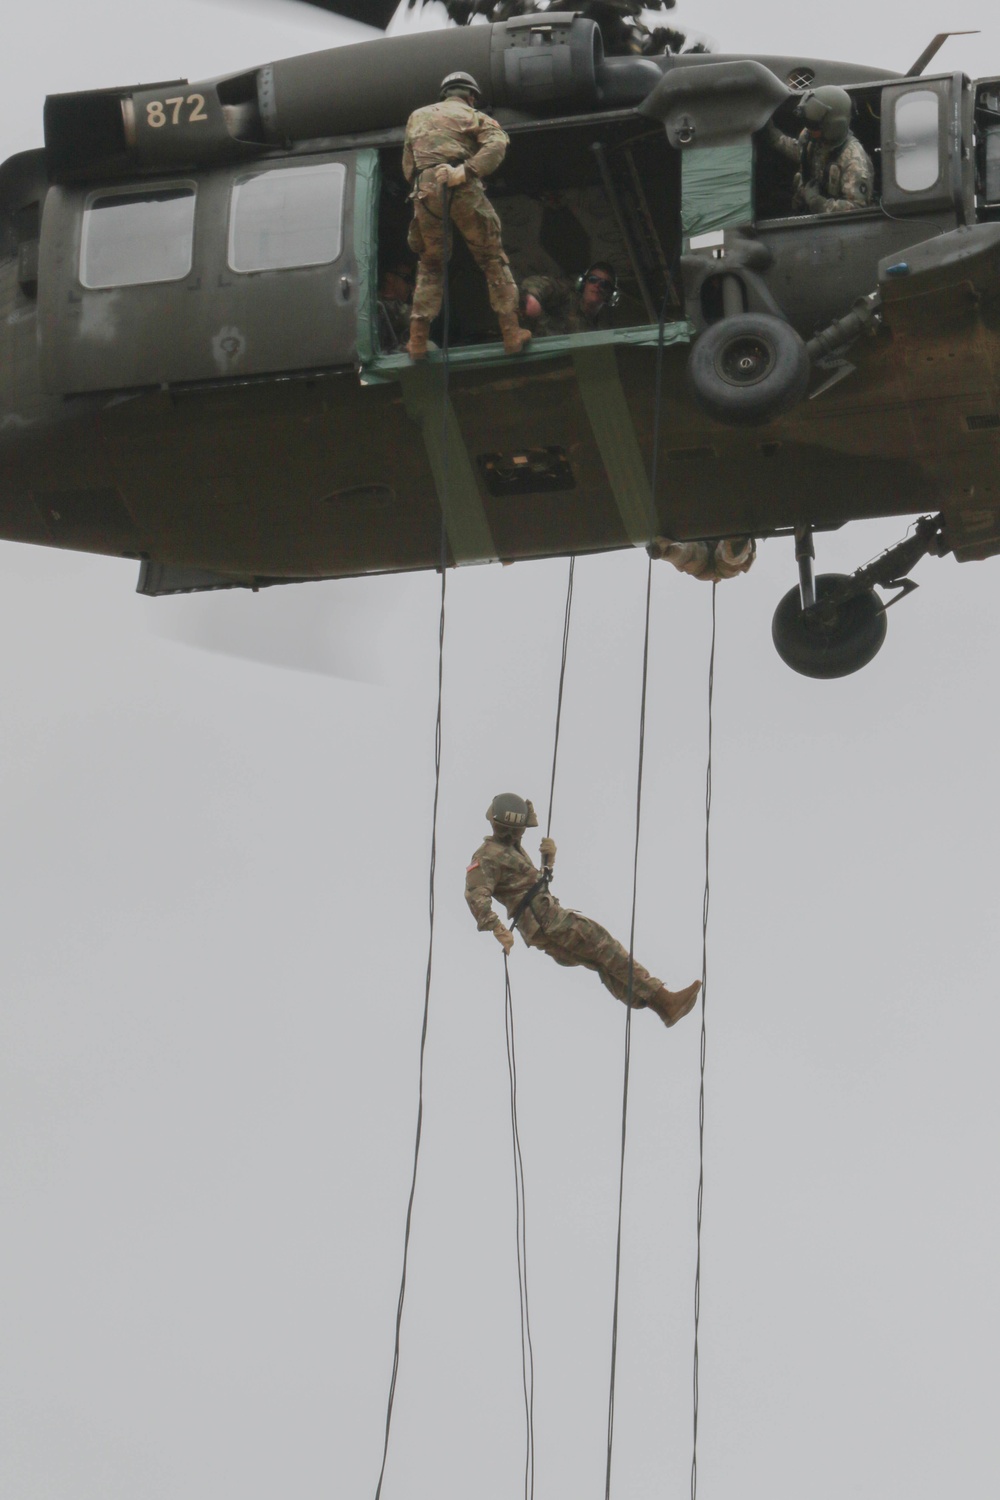 Practice Makes Perfect for Air Assault Cadets